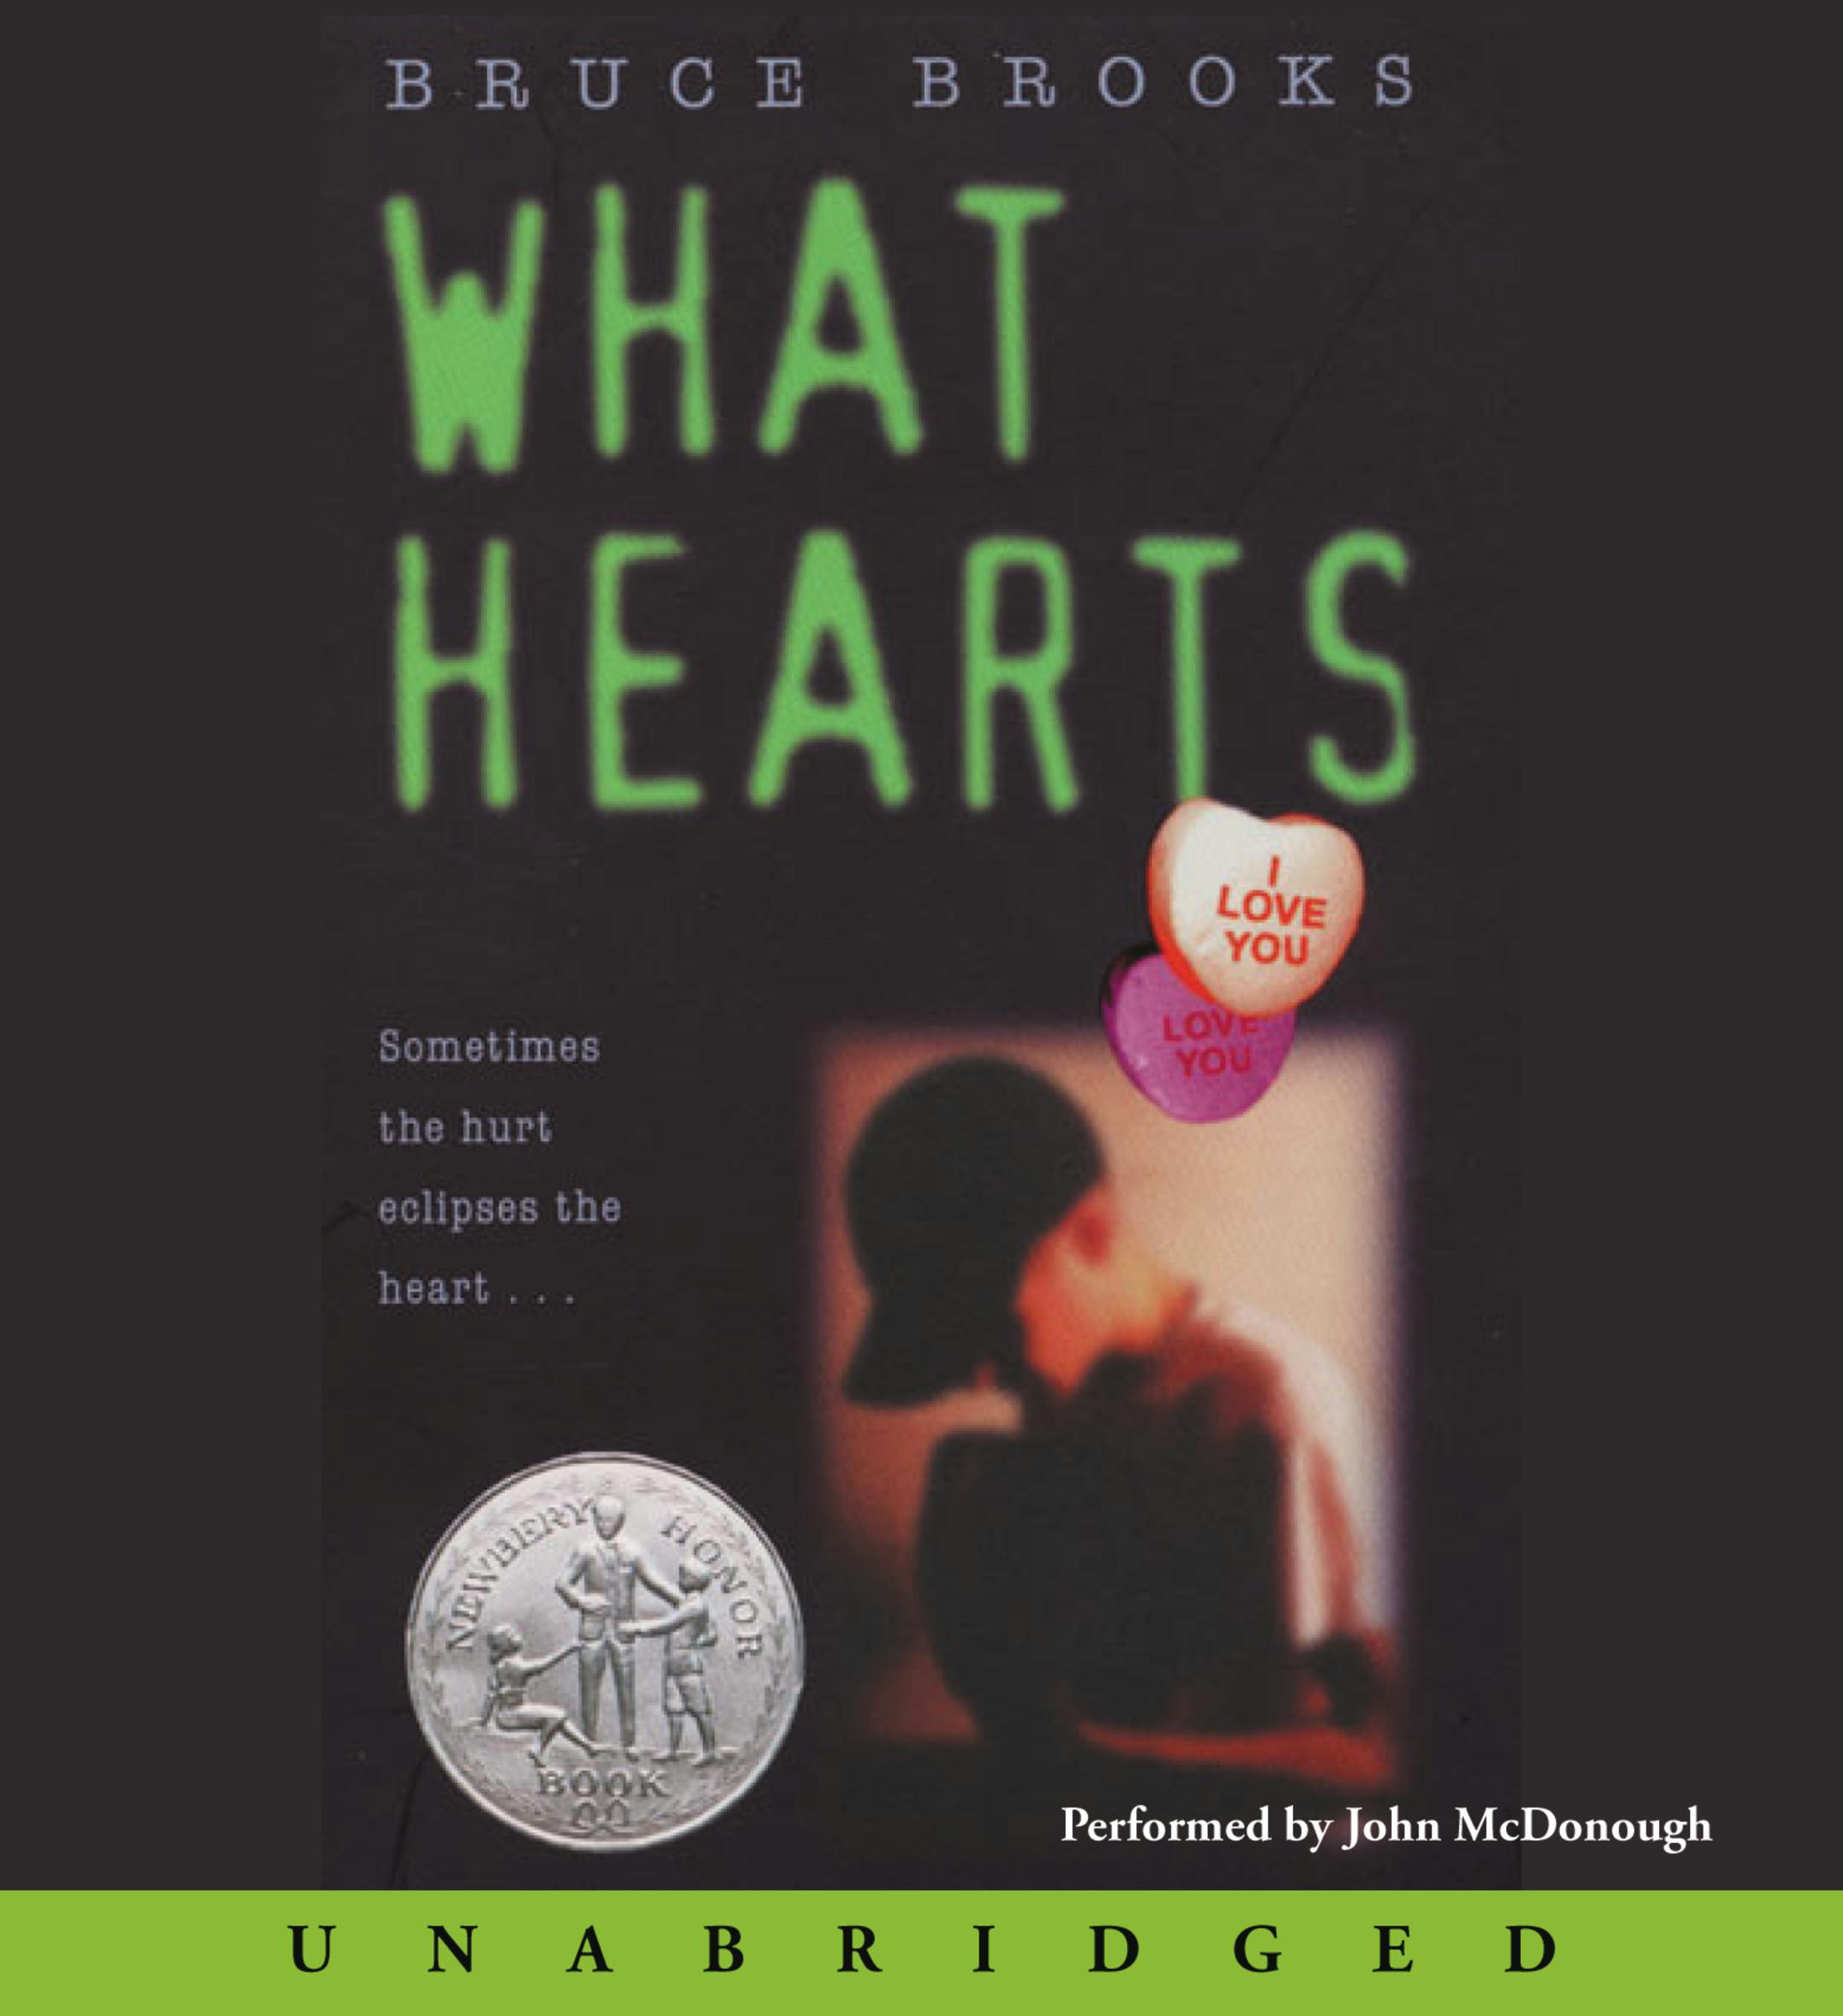 What Hearts - undefined